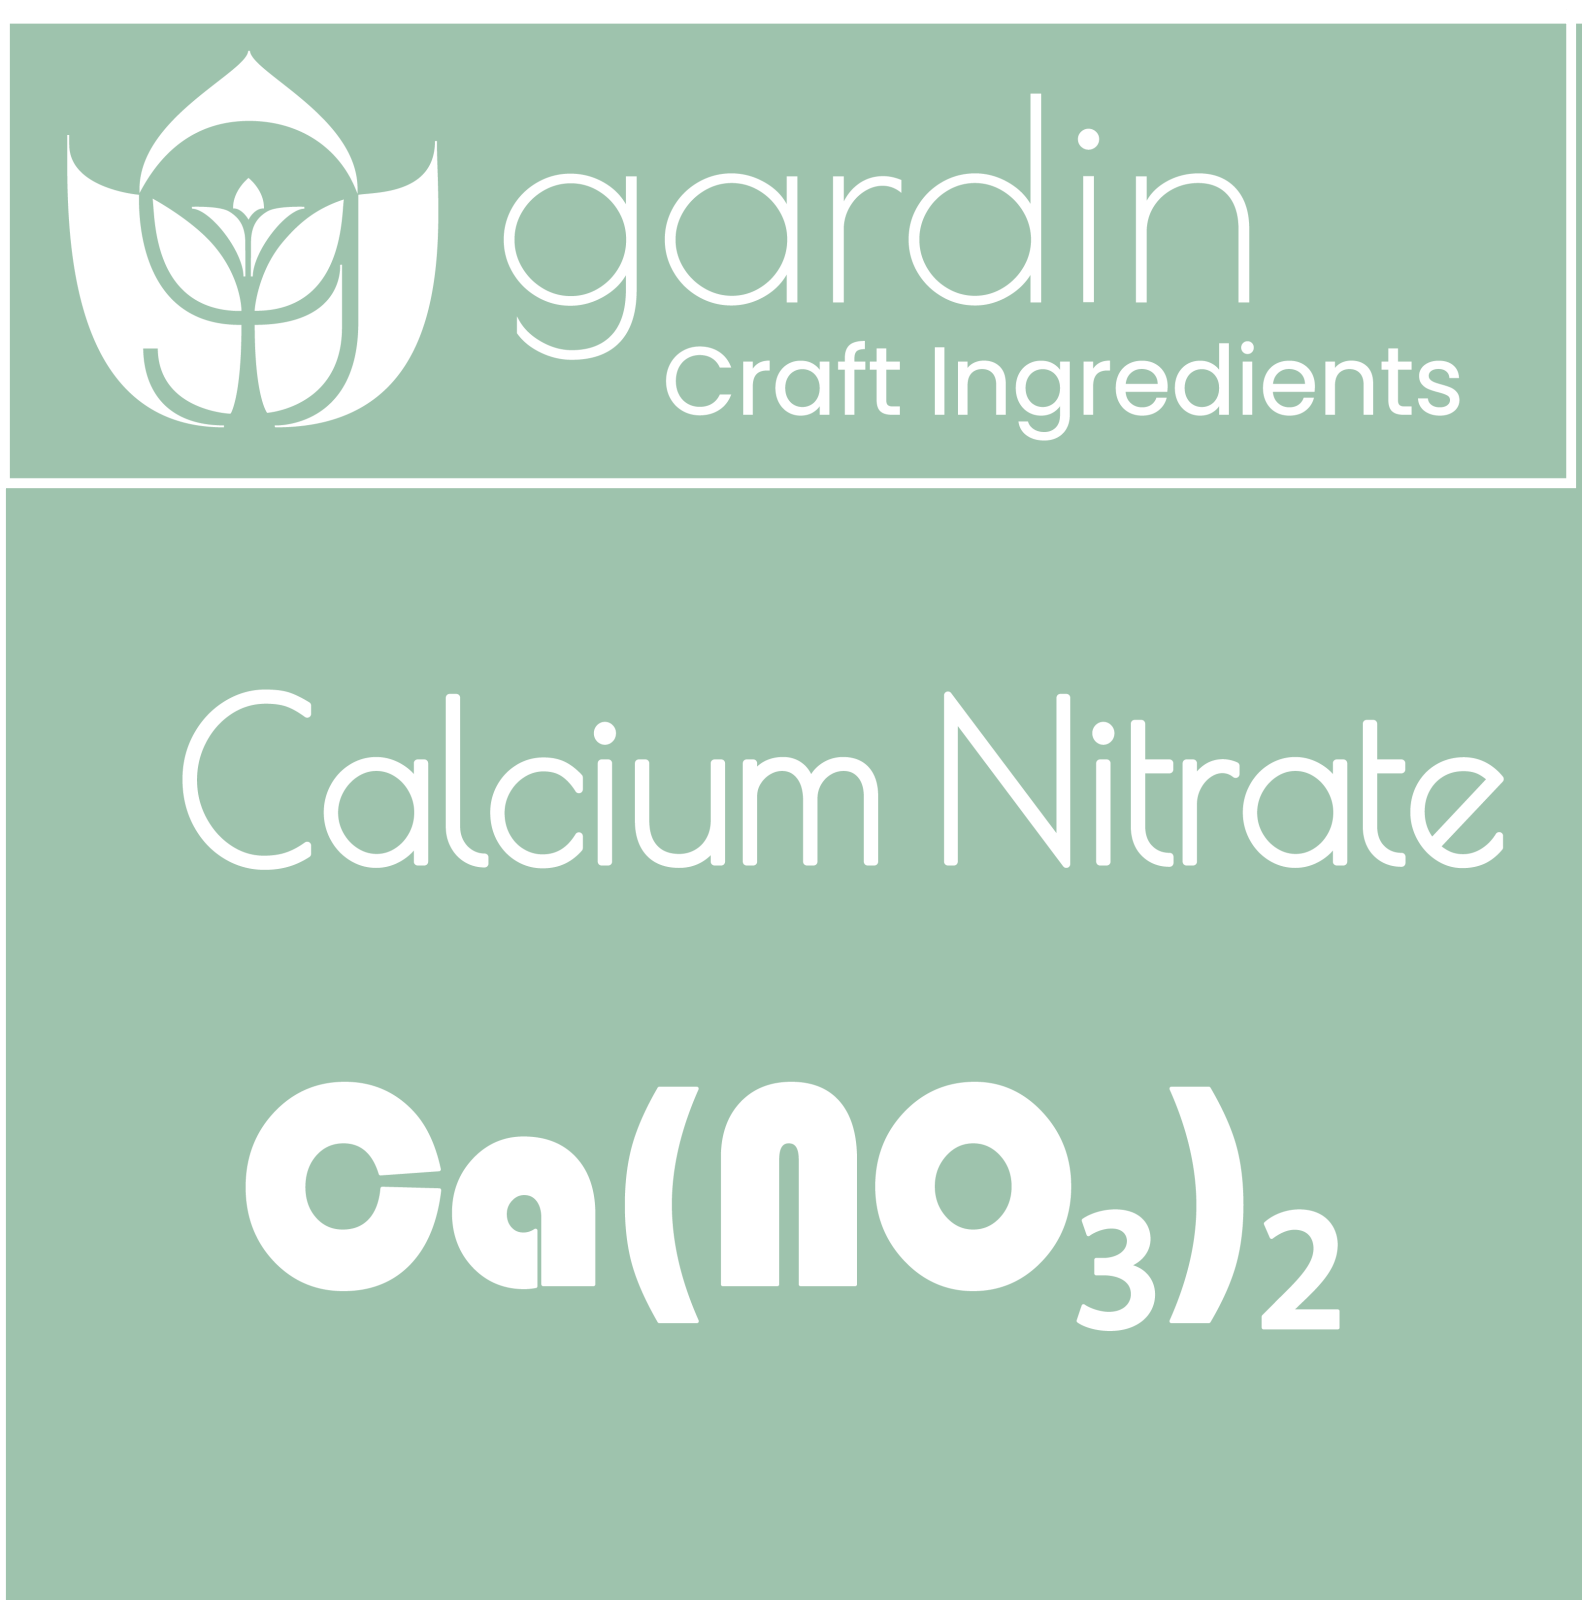 Nutrients, Additives & Solutions - Calcium Nitrate - Gardin Warehouse